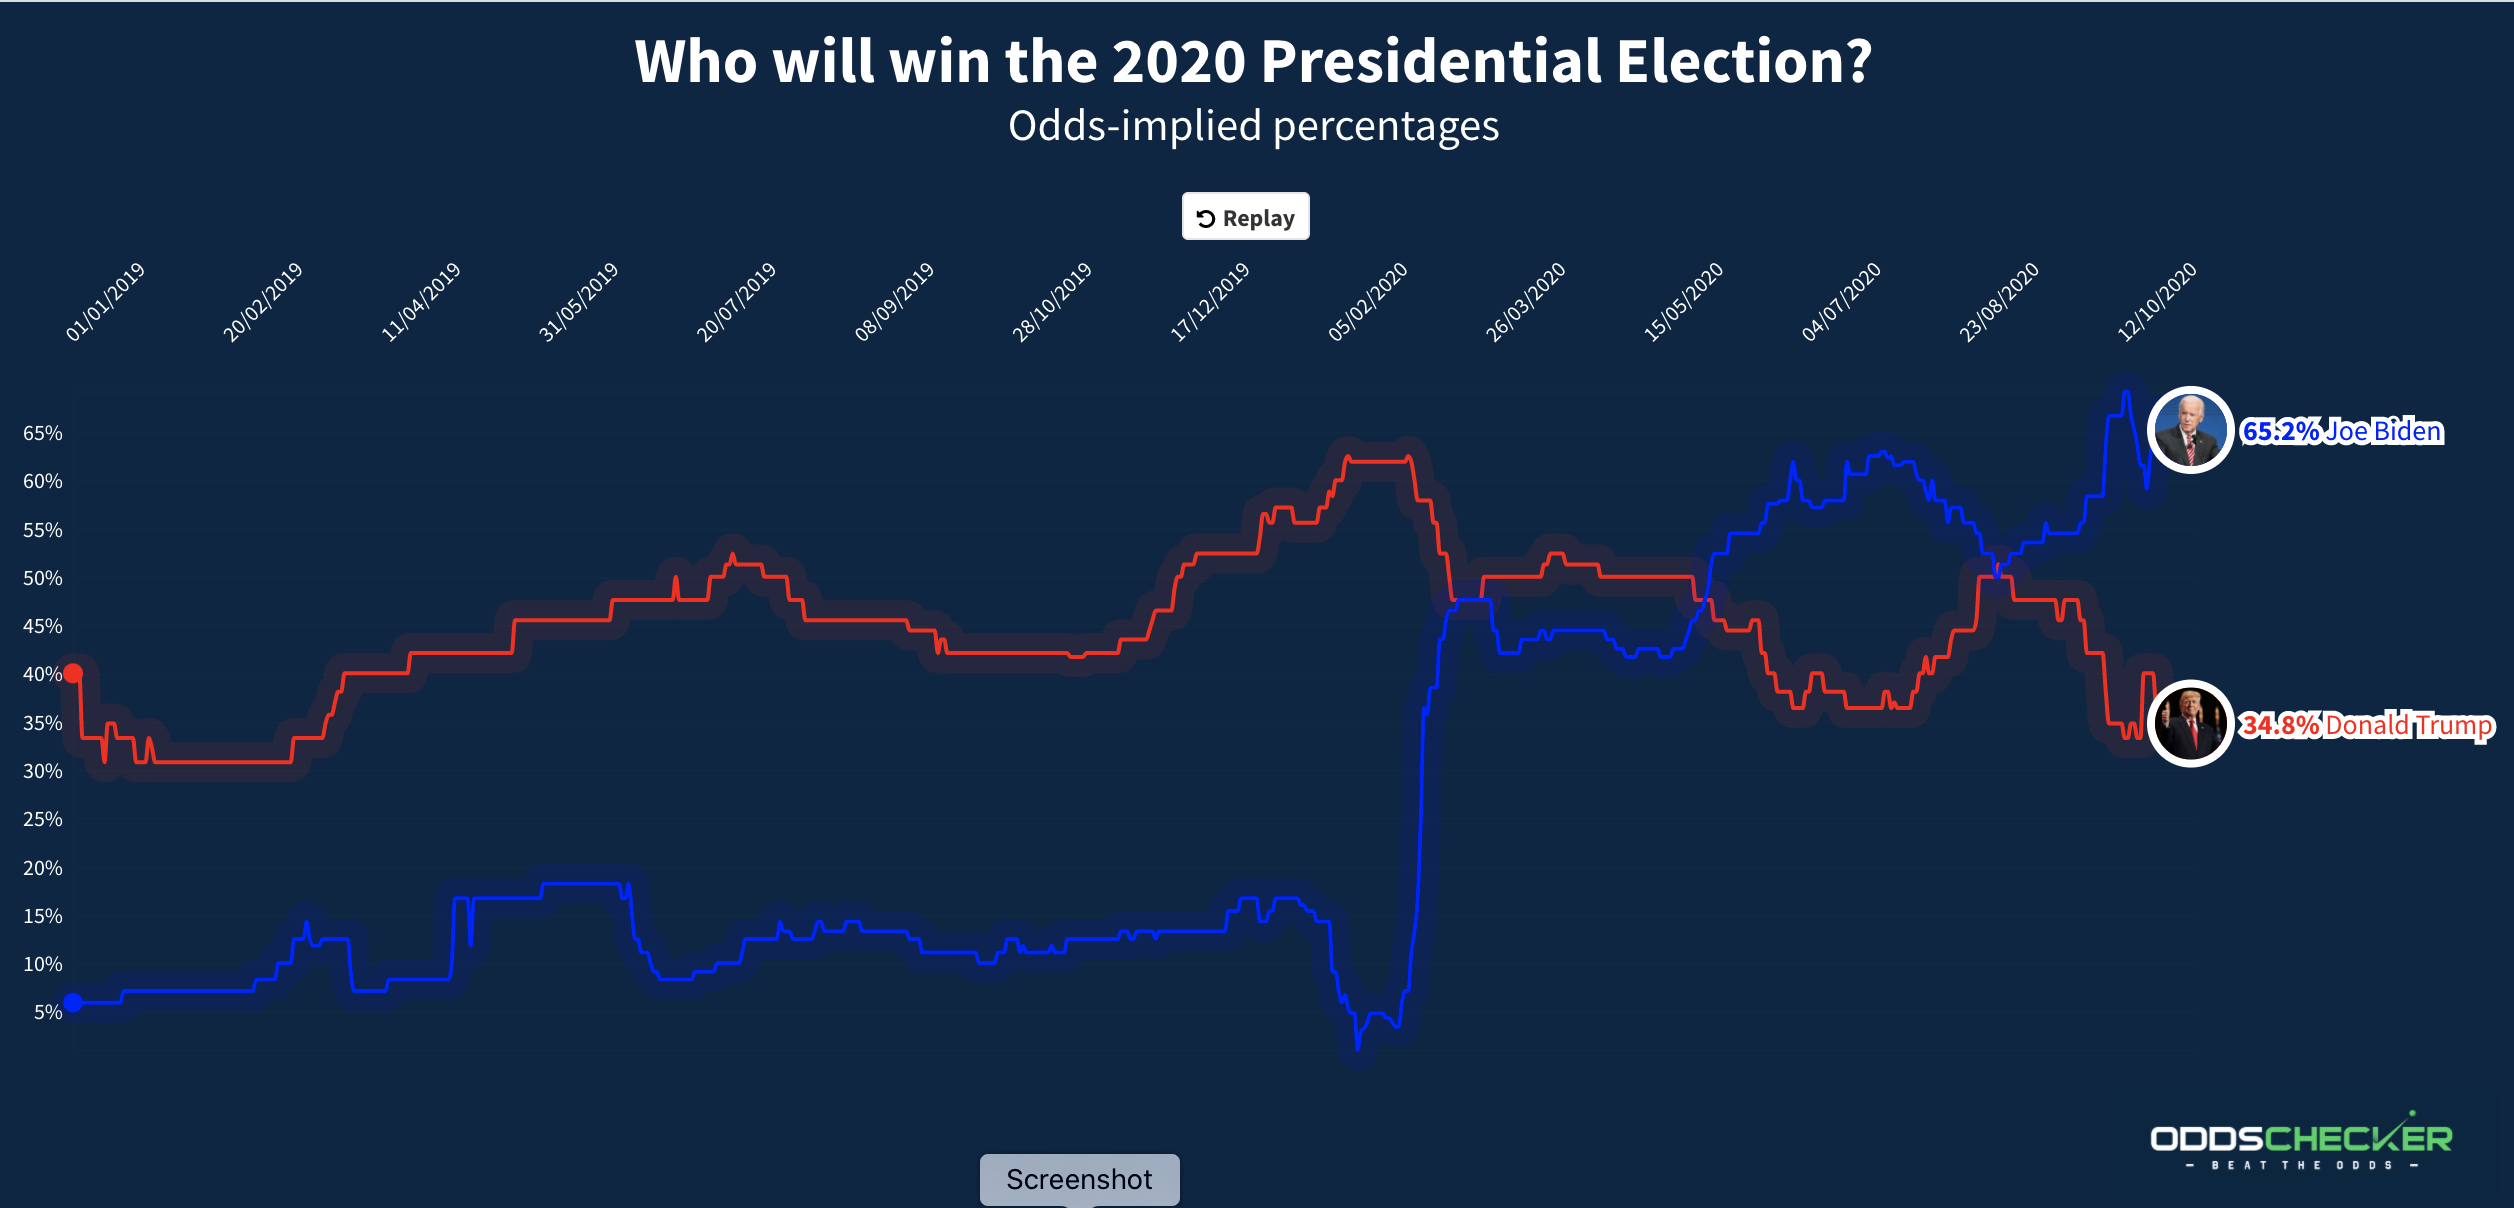 Who will win 2020 election